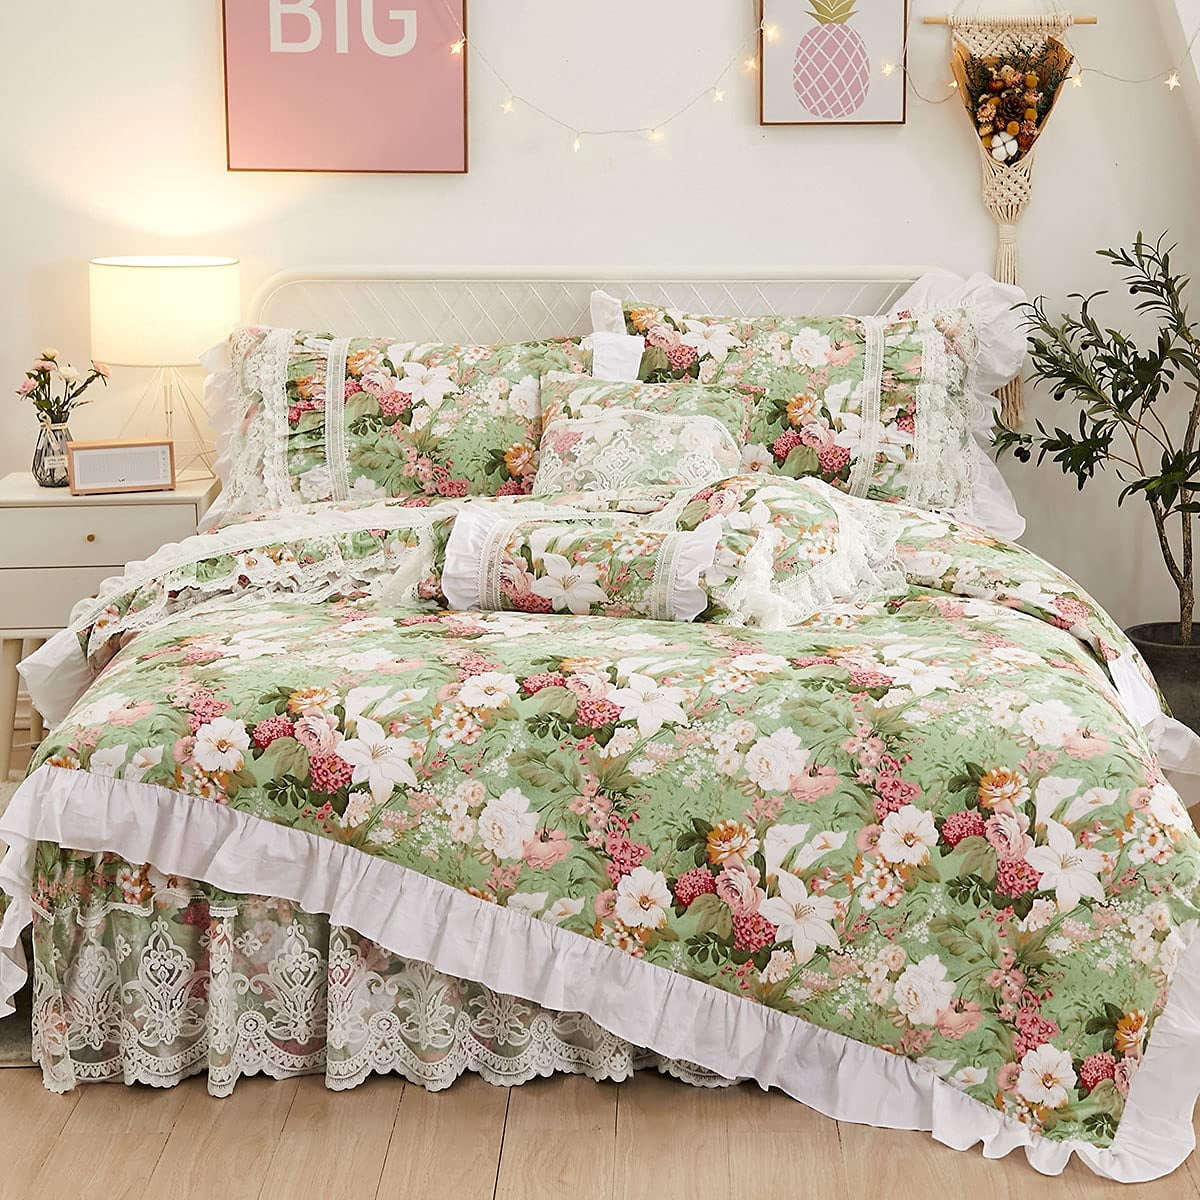 Luxury Floral Bed Skirt Dust Ruffle Bedspread Twin Full Queen King Size Bedding 